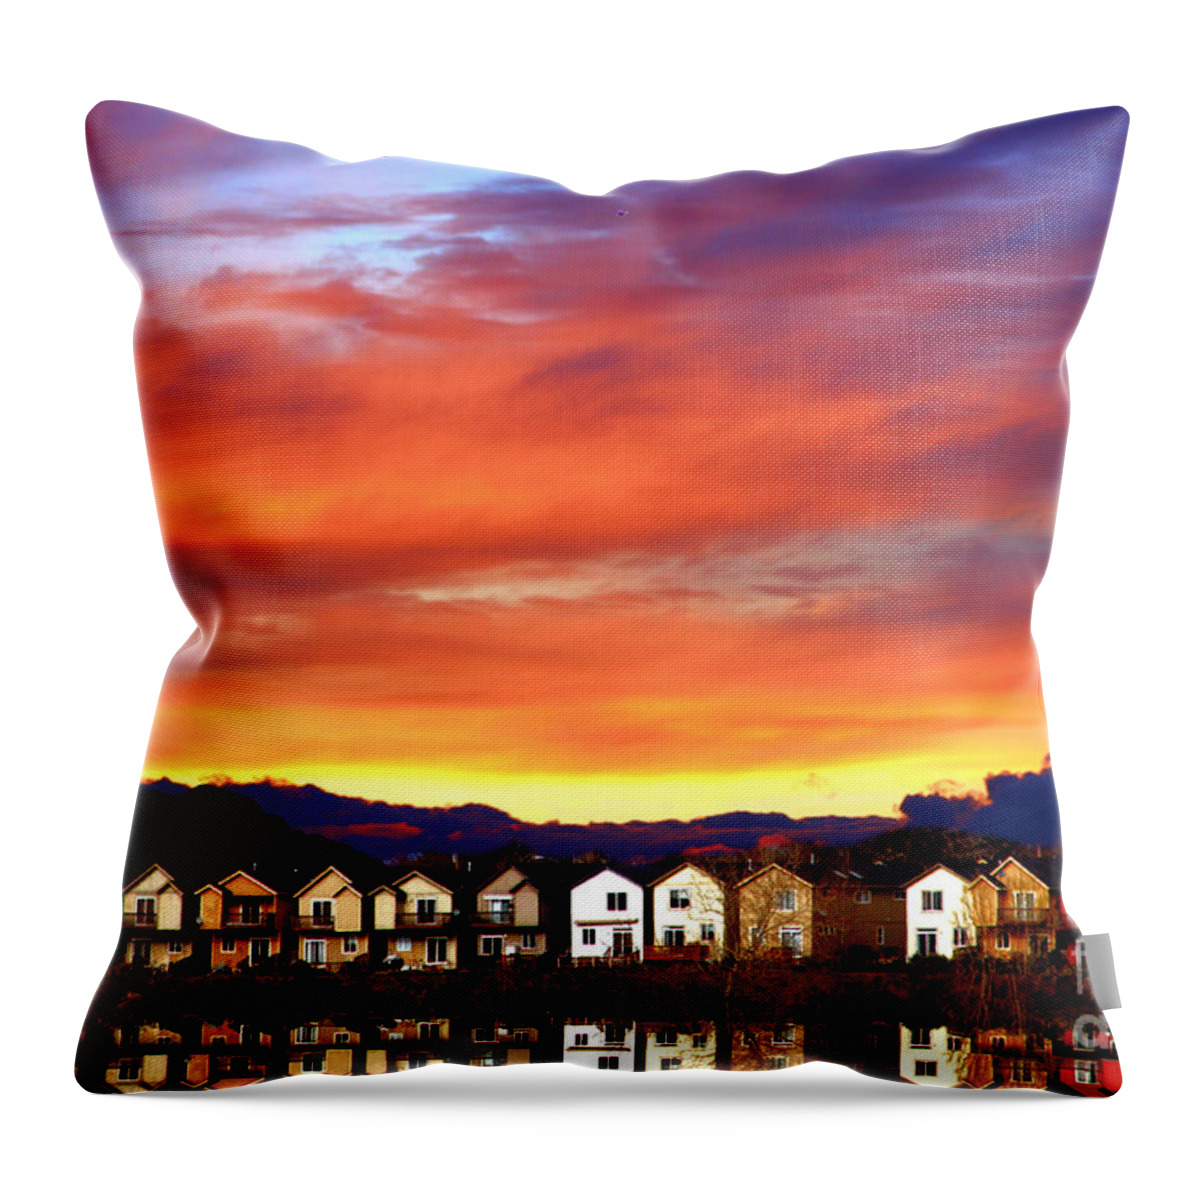 Reflections Throw Pillow featuring the photograph Lakeside Reflections by Nick Gustafson